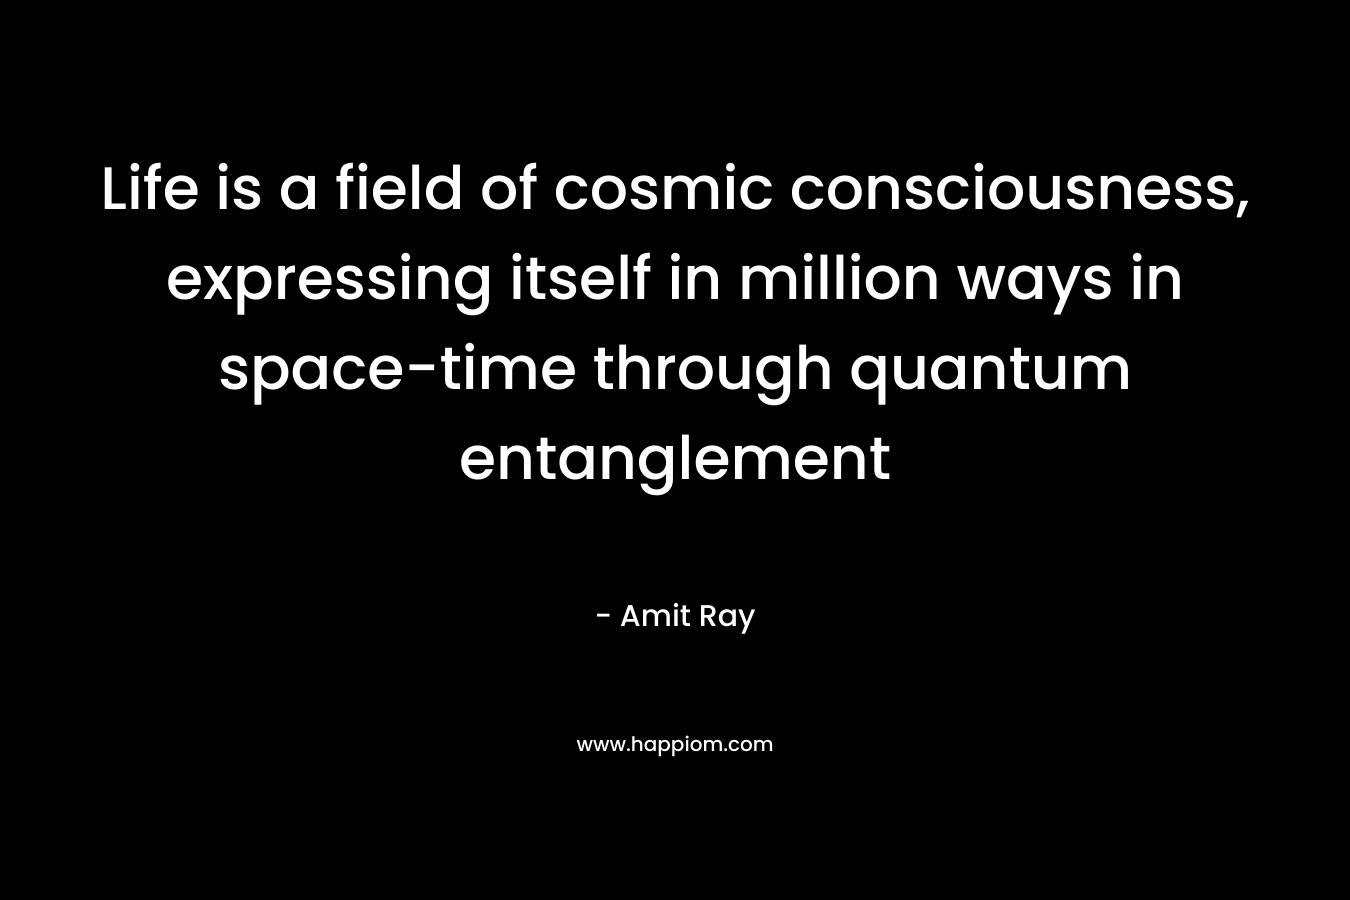 Life is a field of cosmic consciousness, expressing itself in million ways in space-time through quantum entanglement